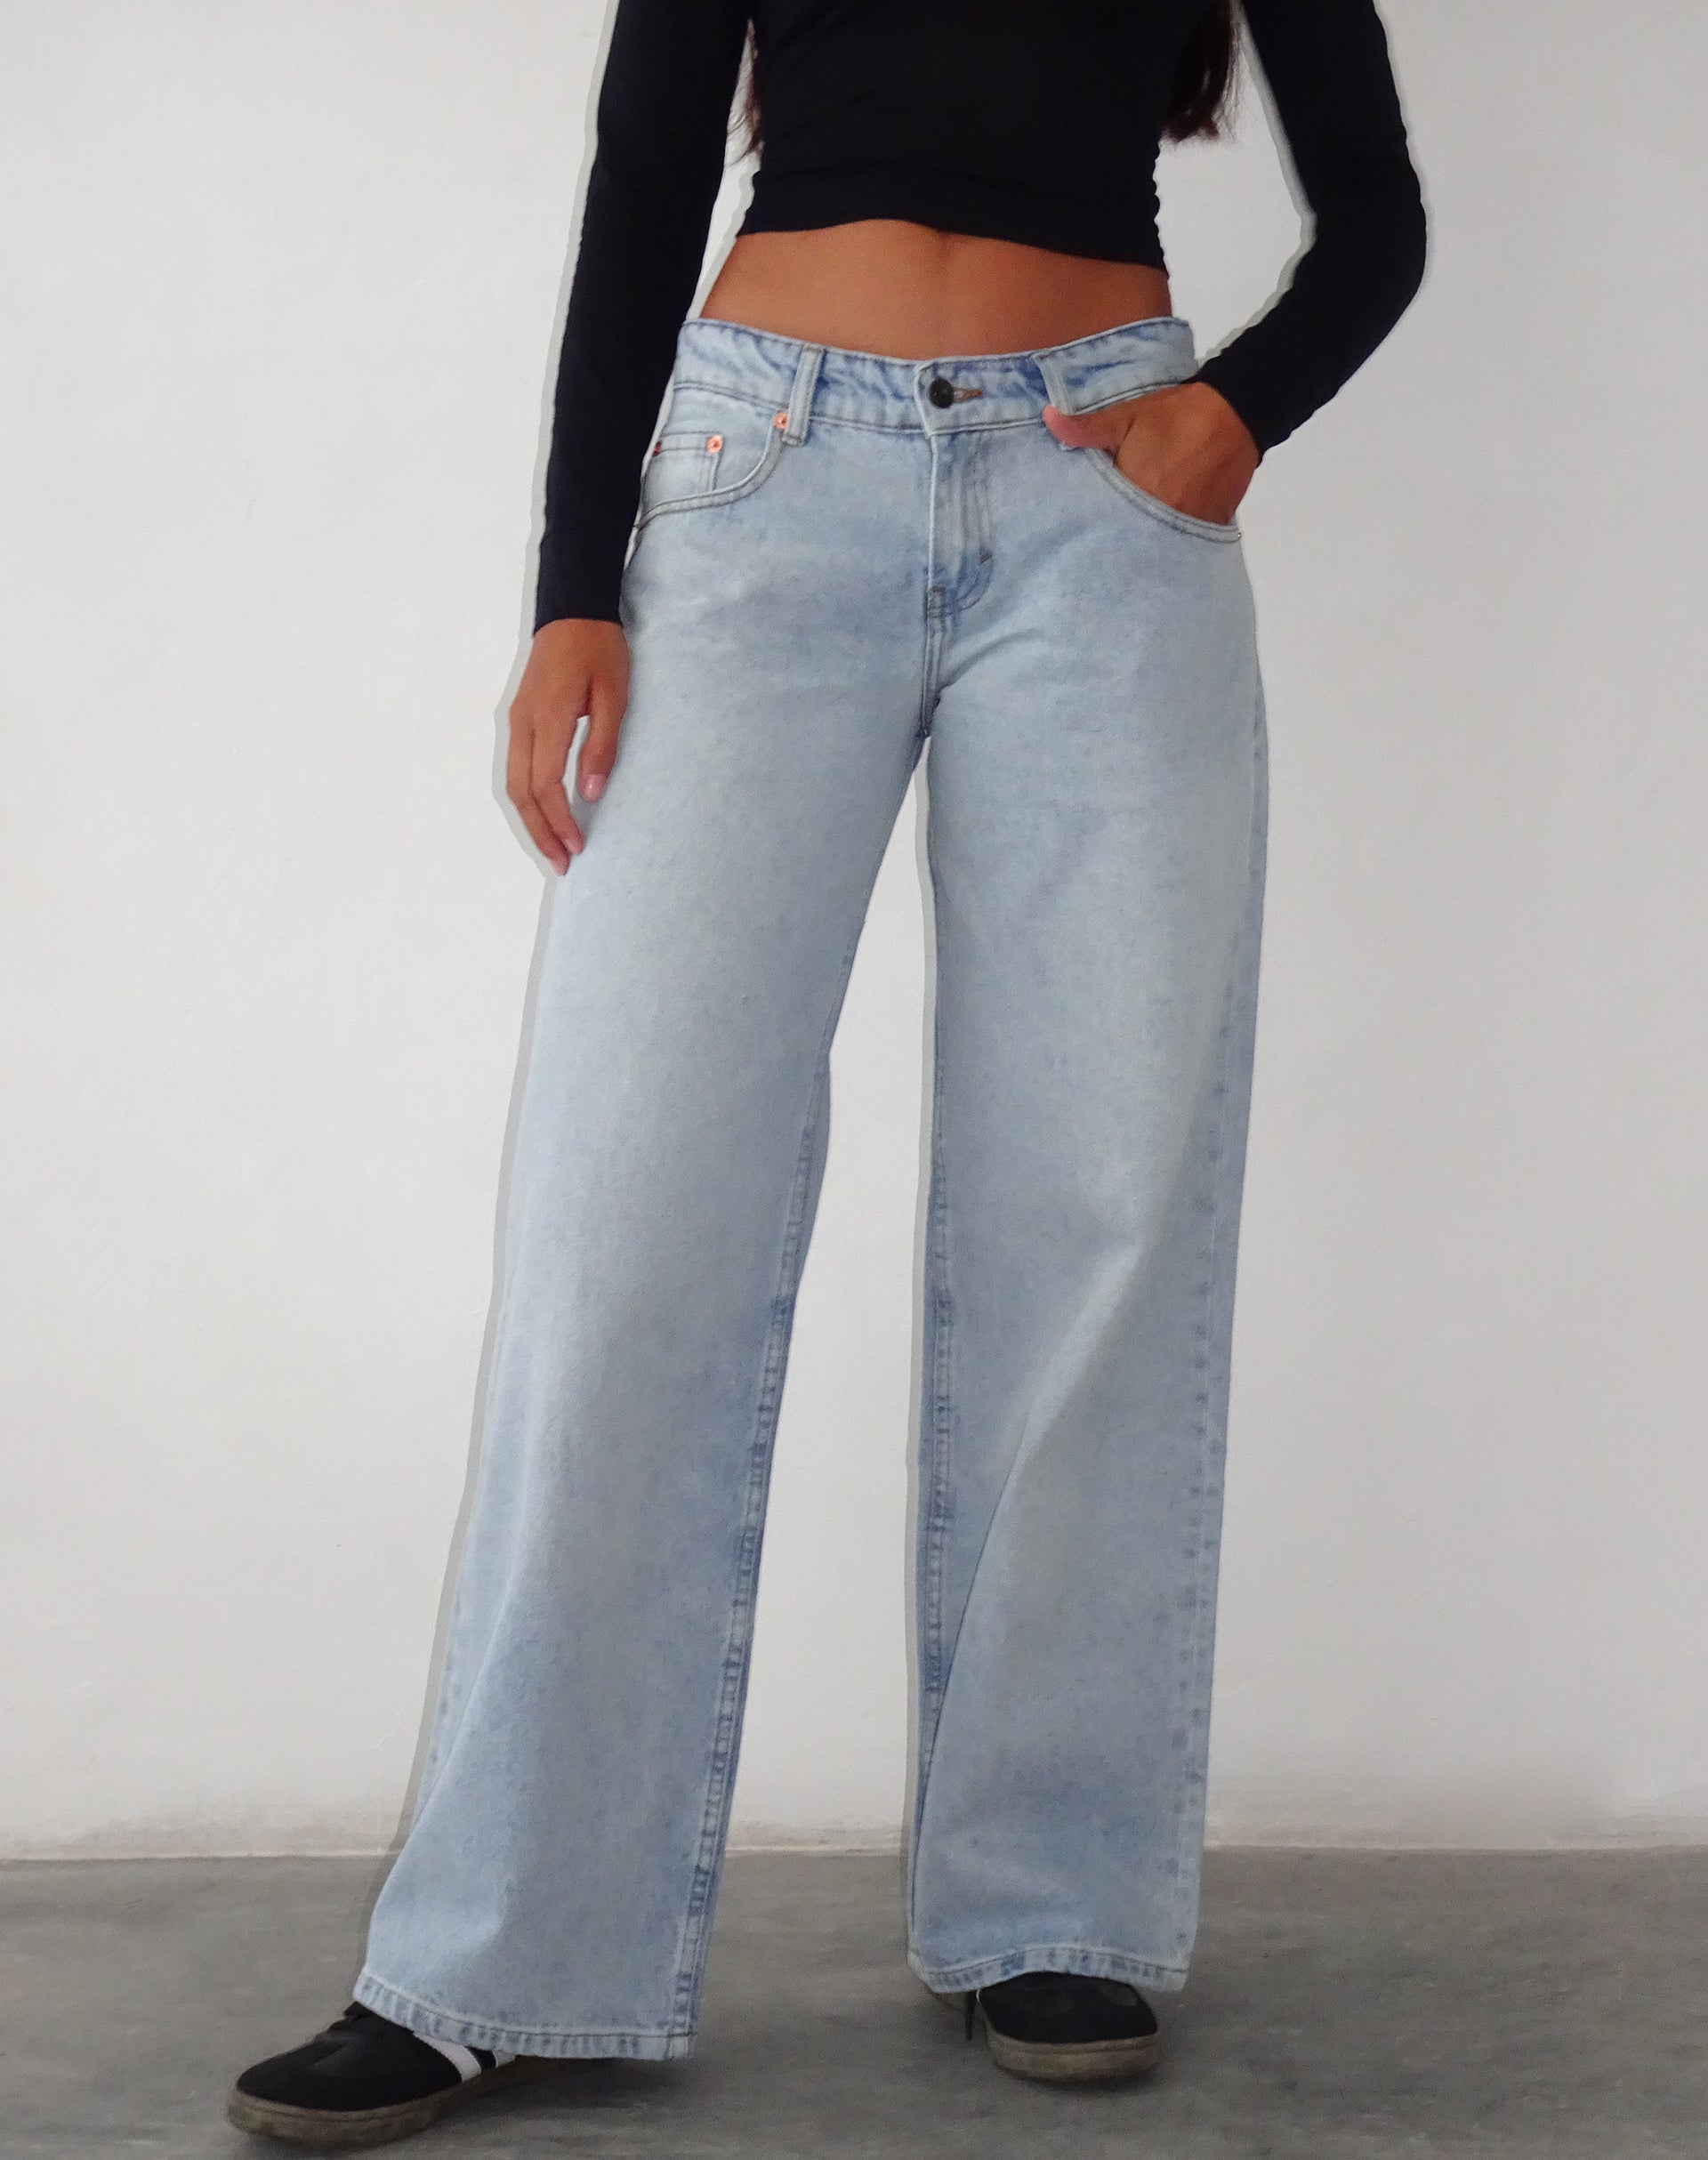 Image of Roomy Extra Wide Low Rise Jeans in Extreme Light Blue Wash